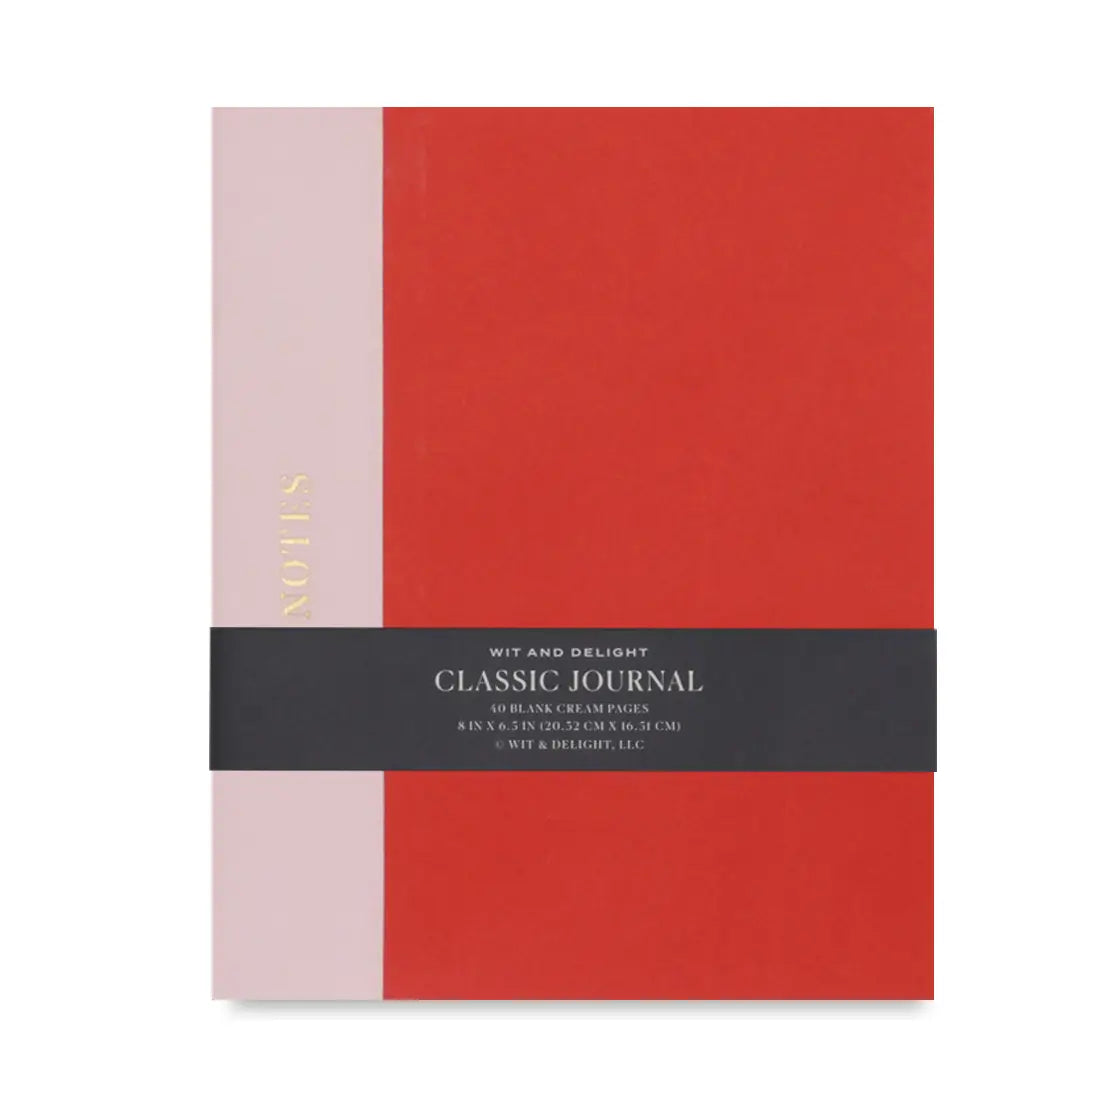 Classic Journal - Red/Pink